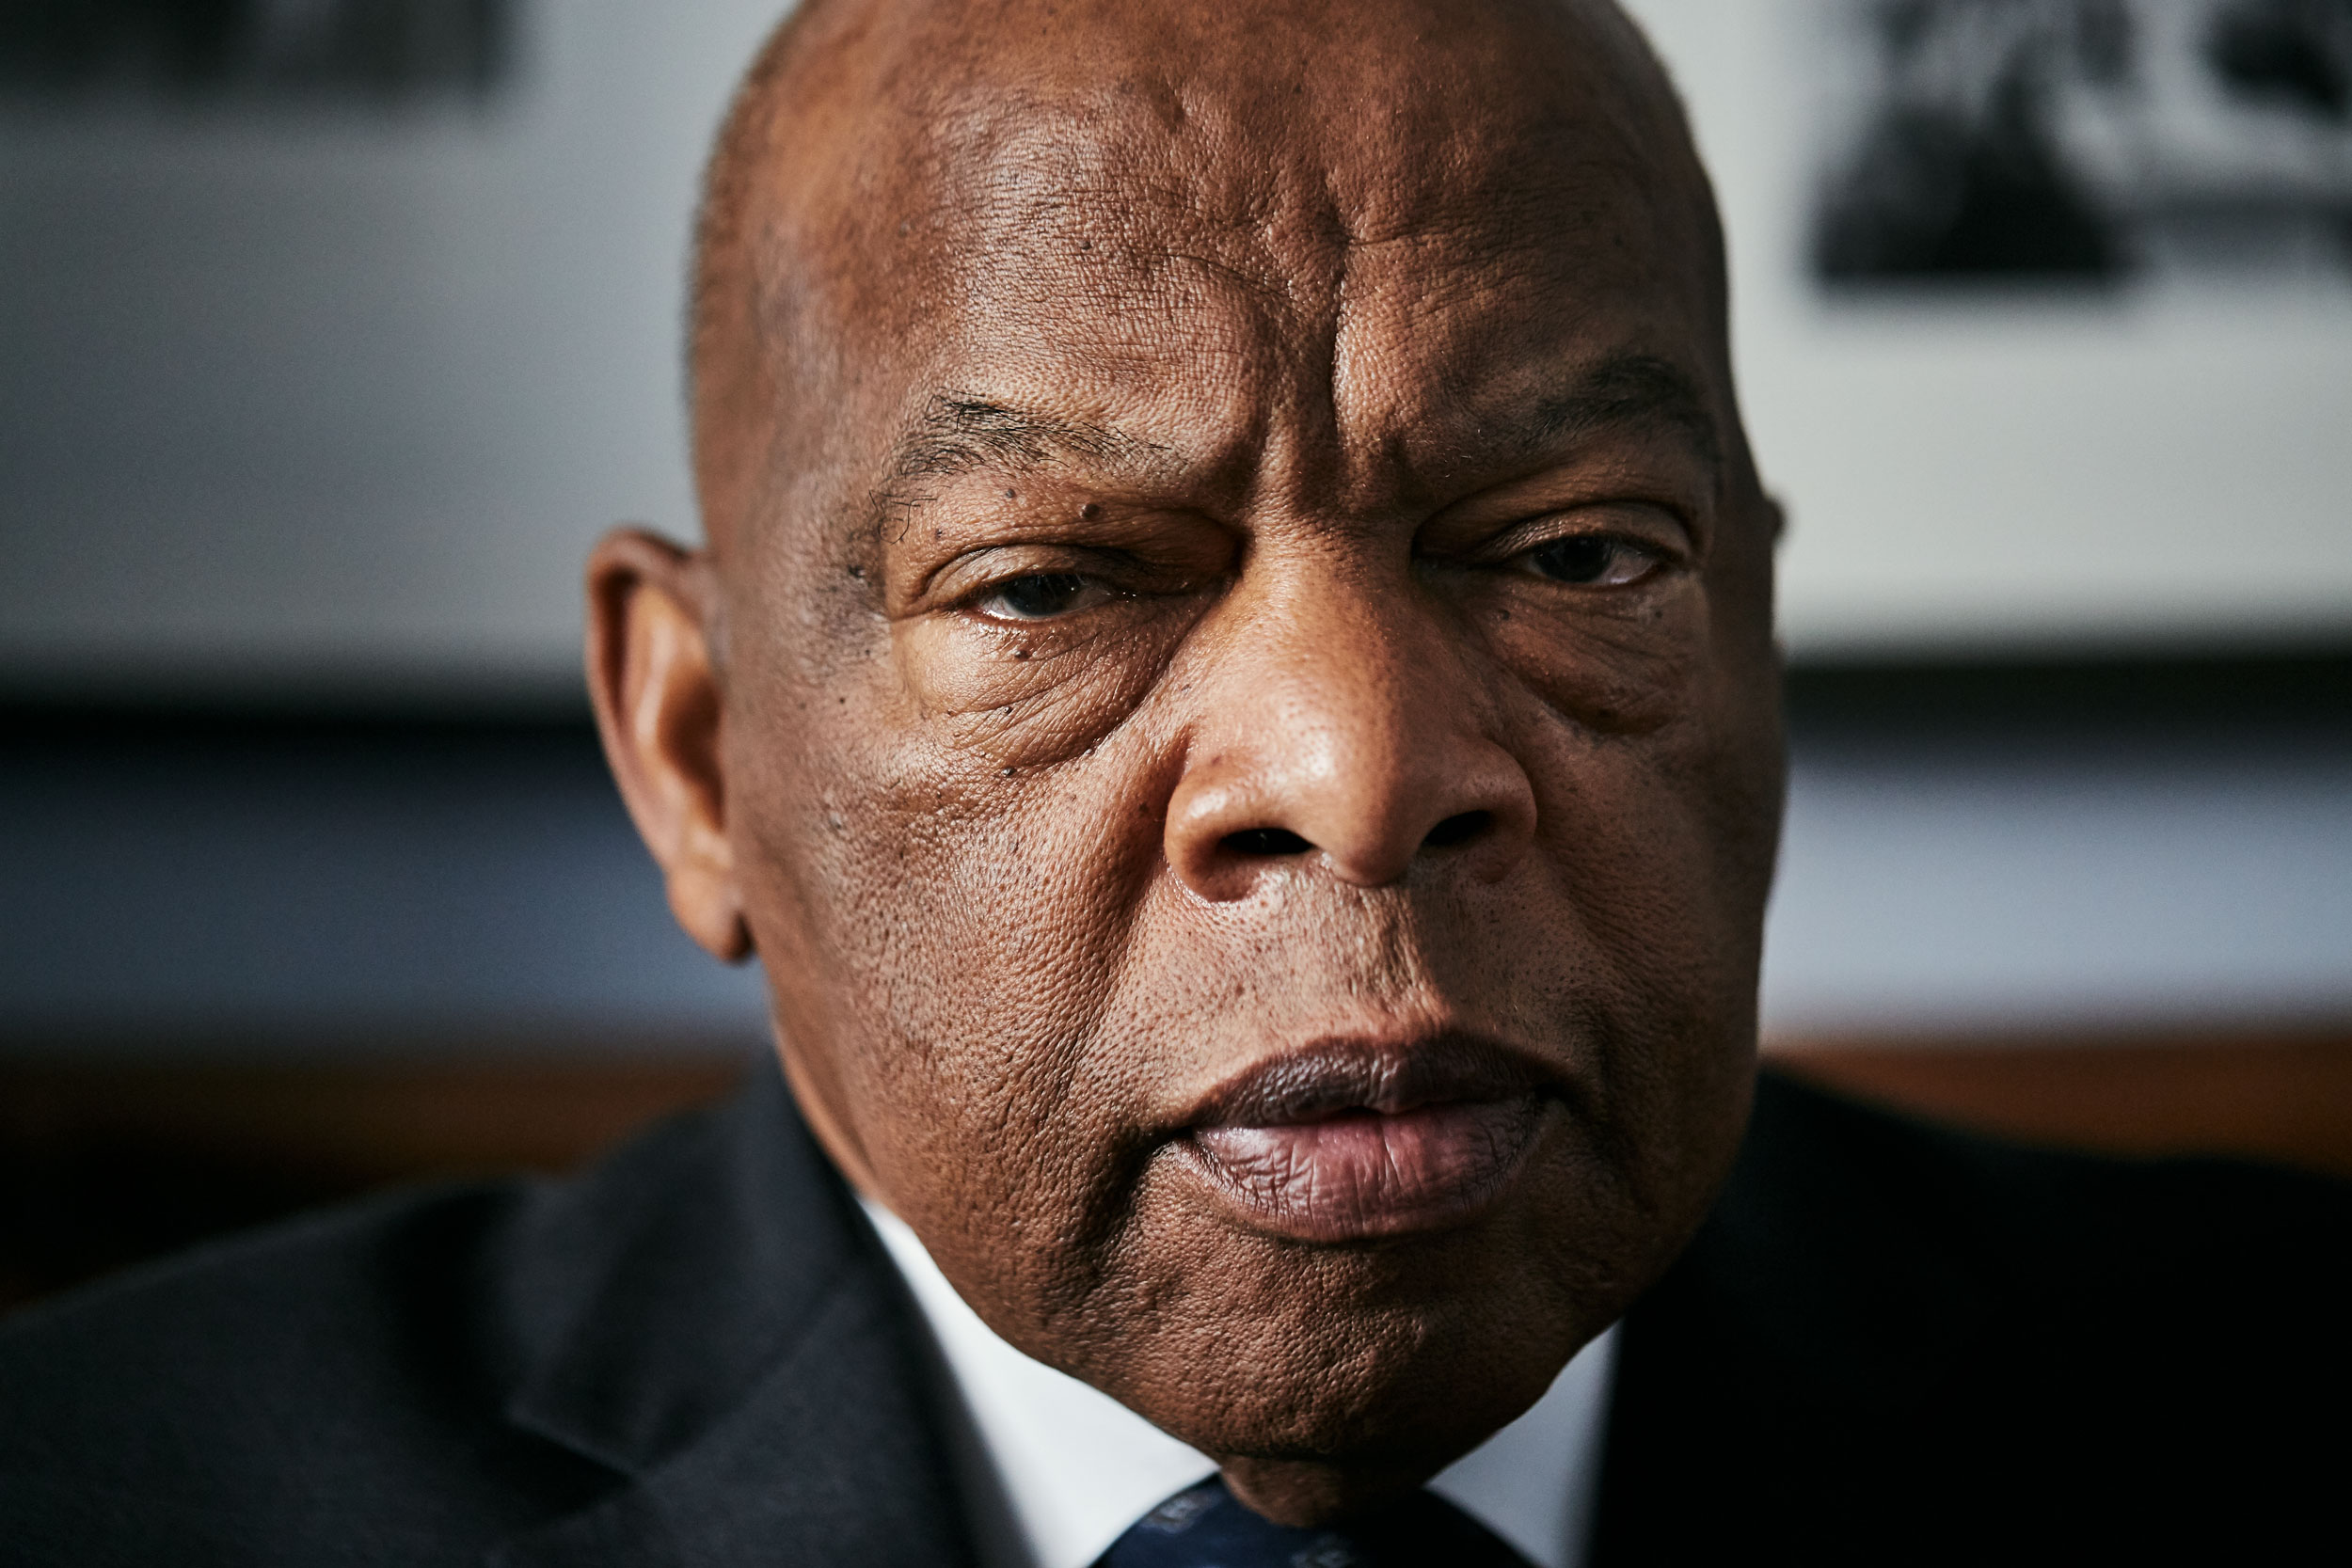 Congressman John Lewis poses for a close-up portrait in his office at Cannon House Office Building in Washington, DC.